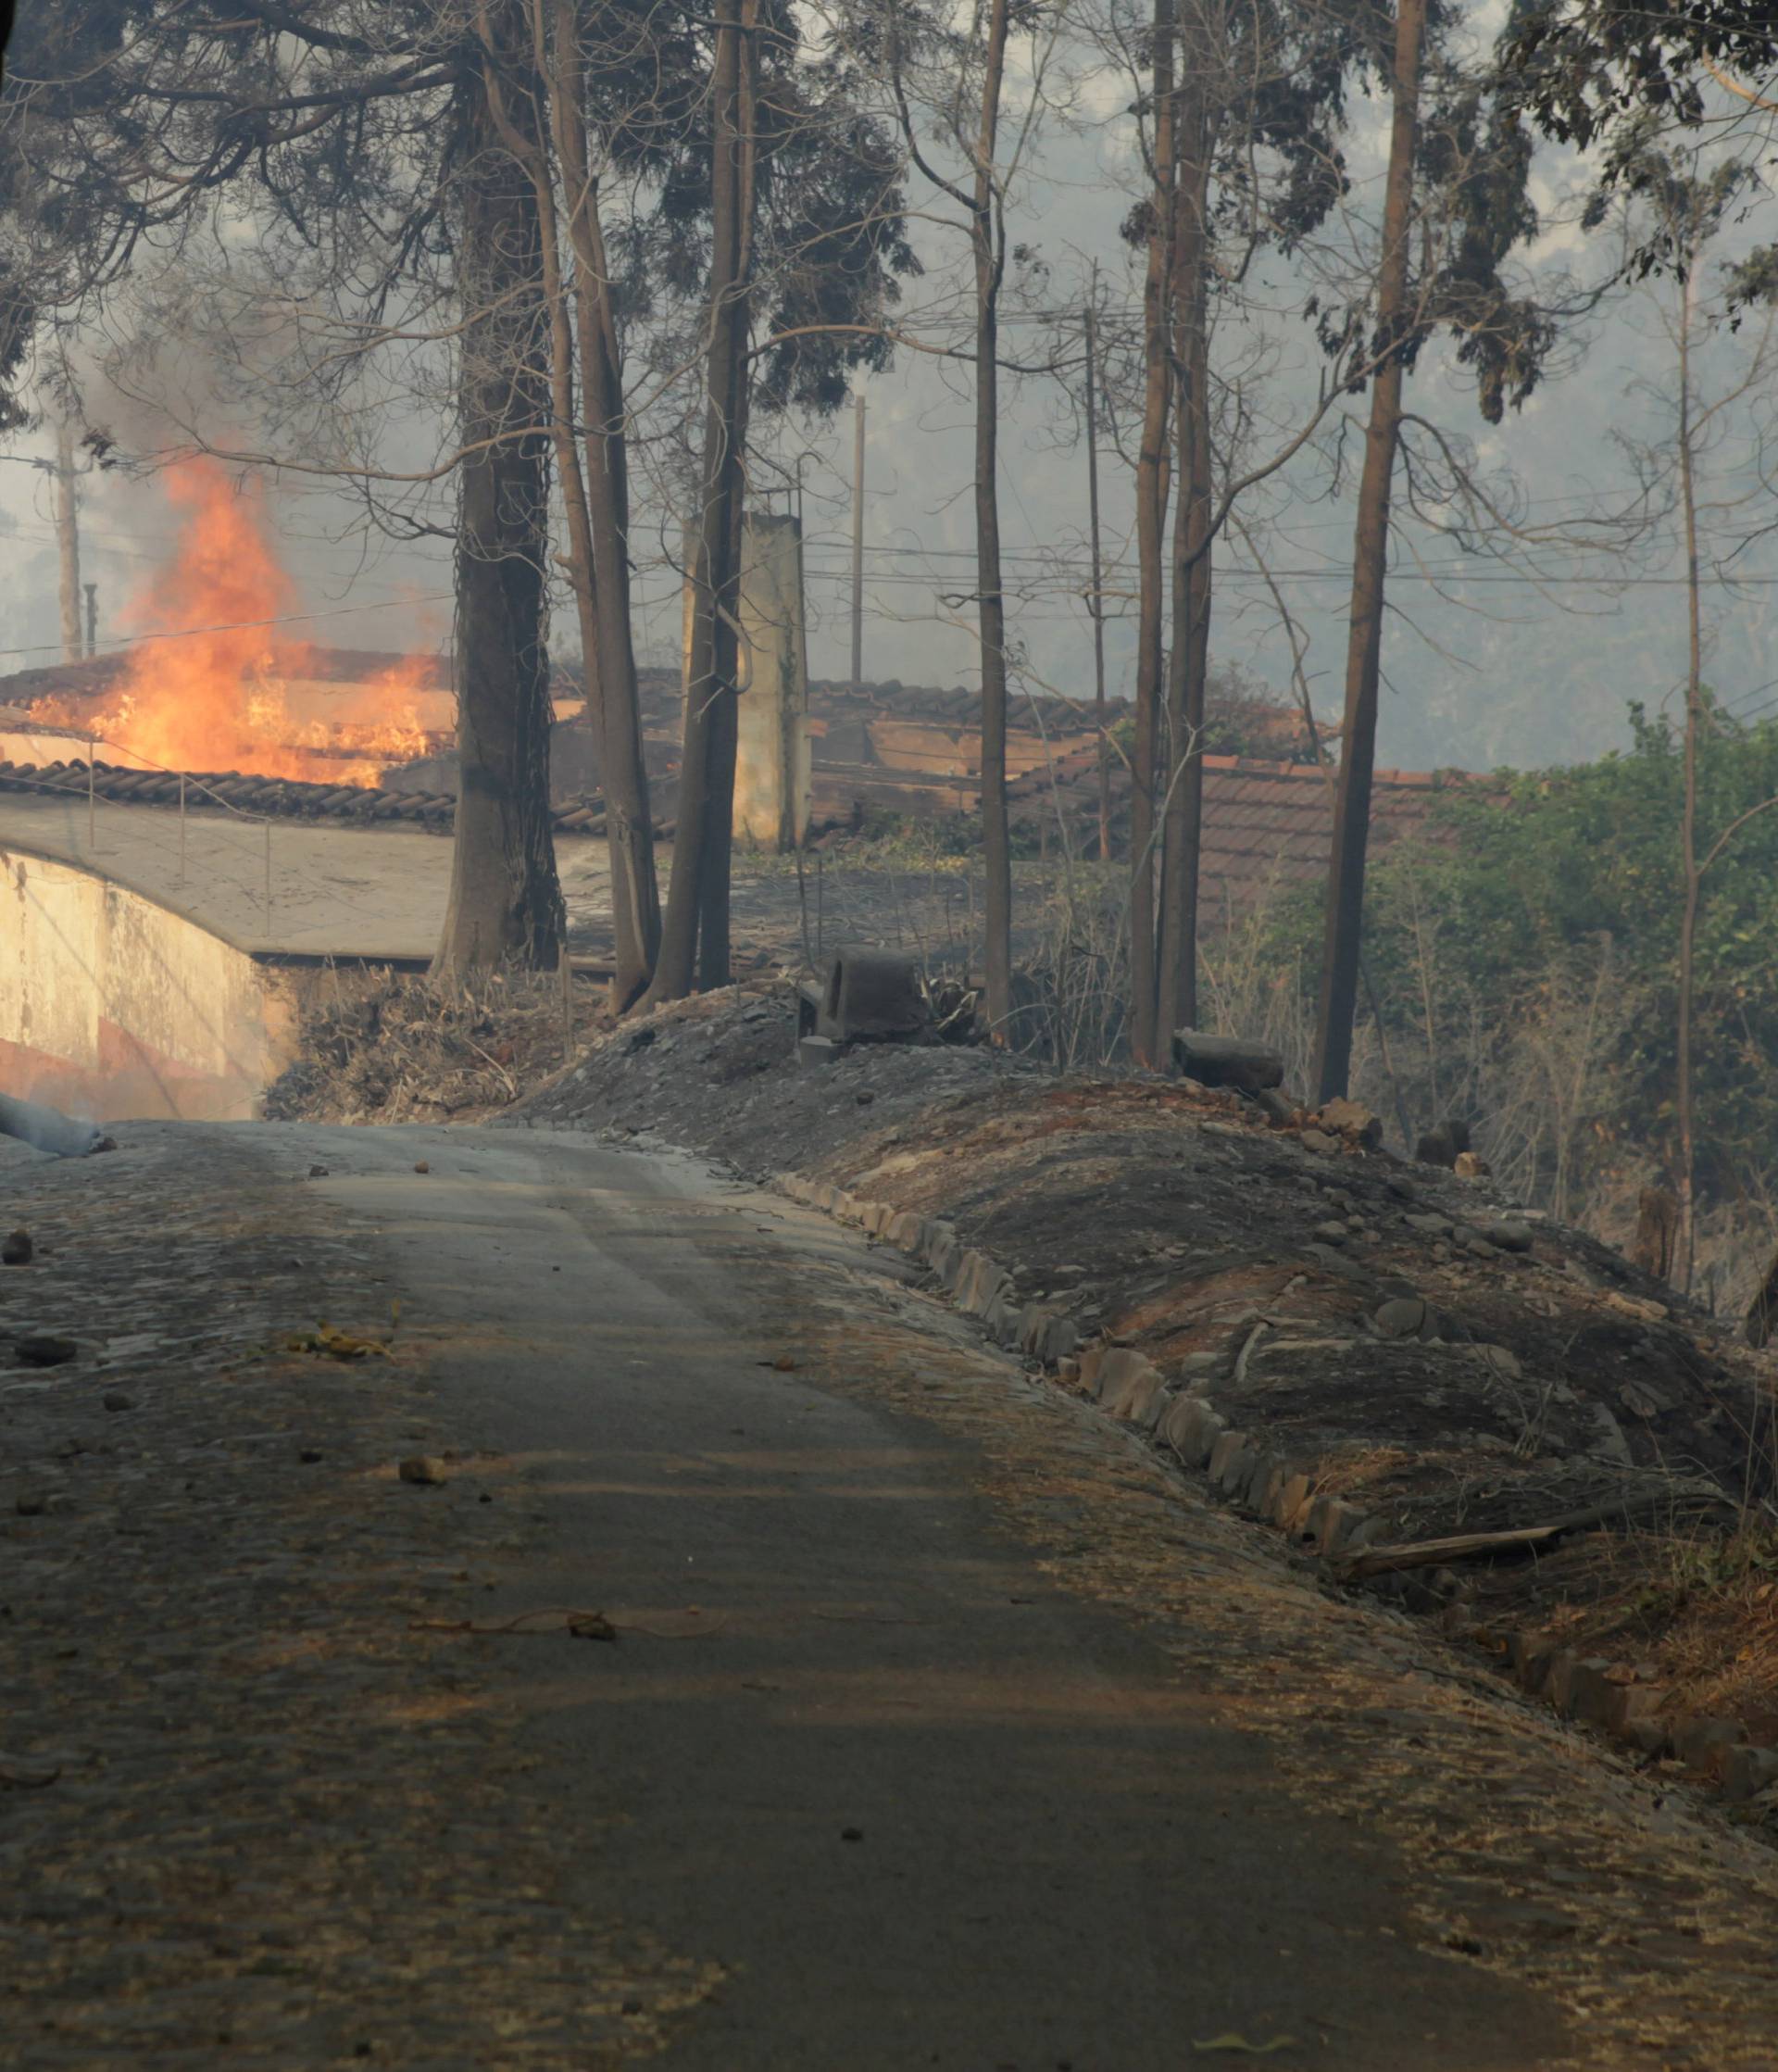 View of a burning house at Caminho do Meio during the forest fires in Funchal